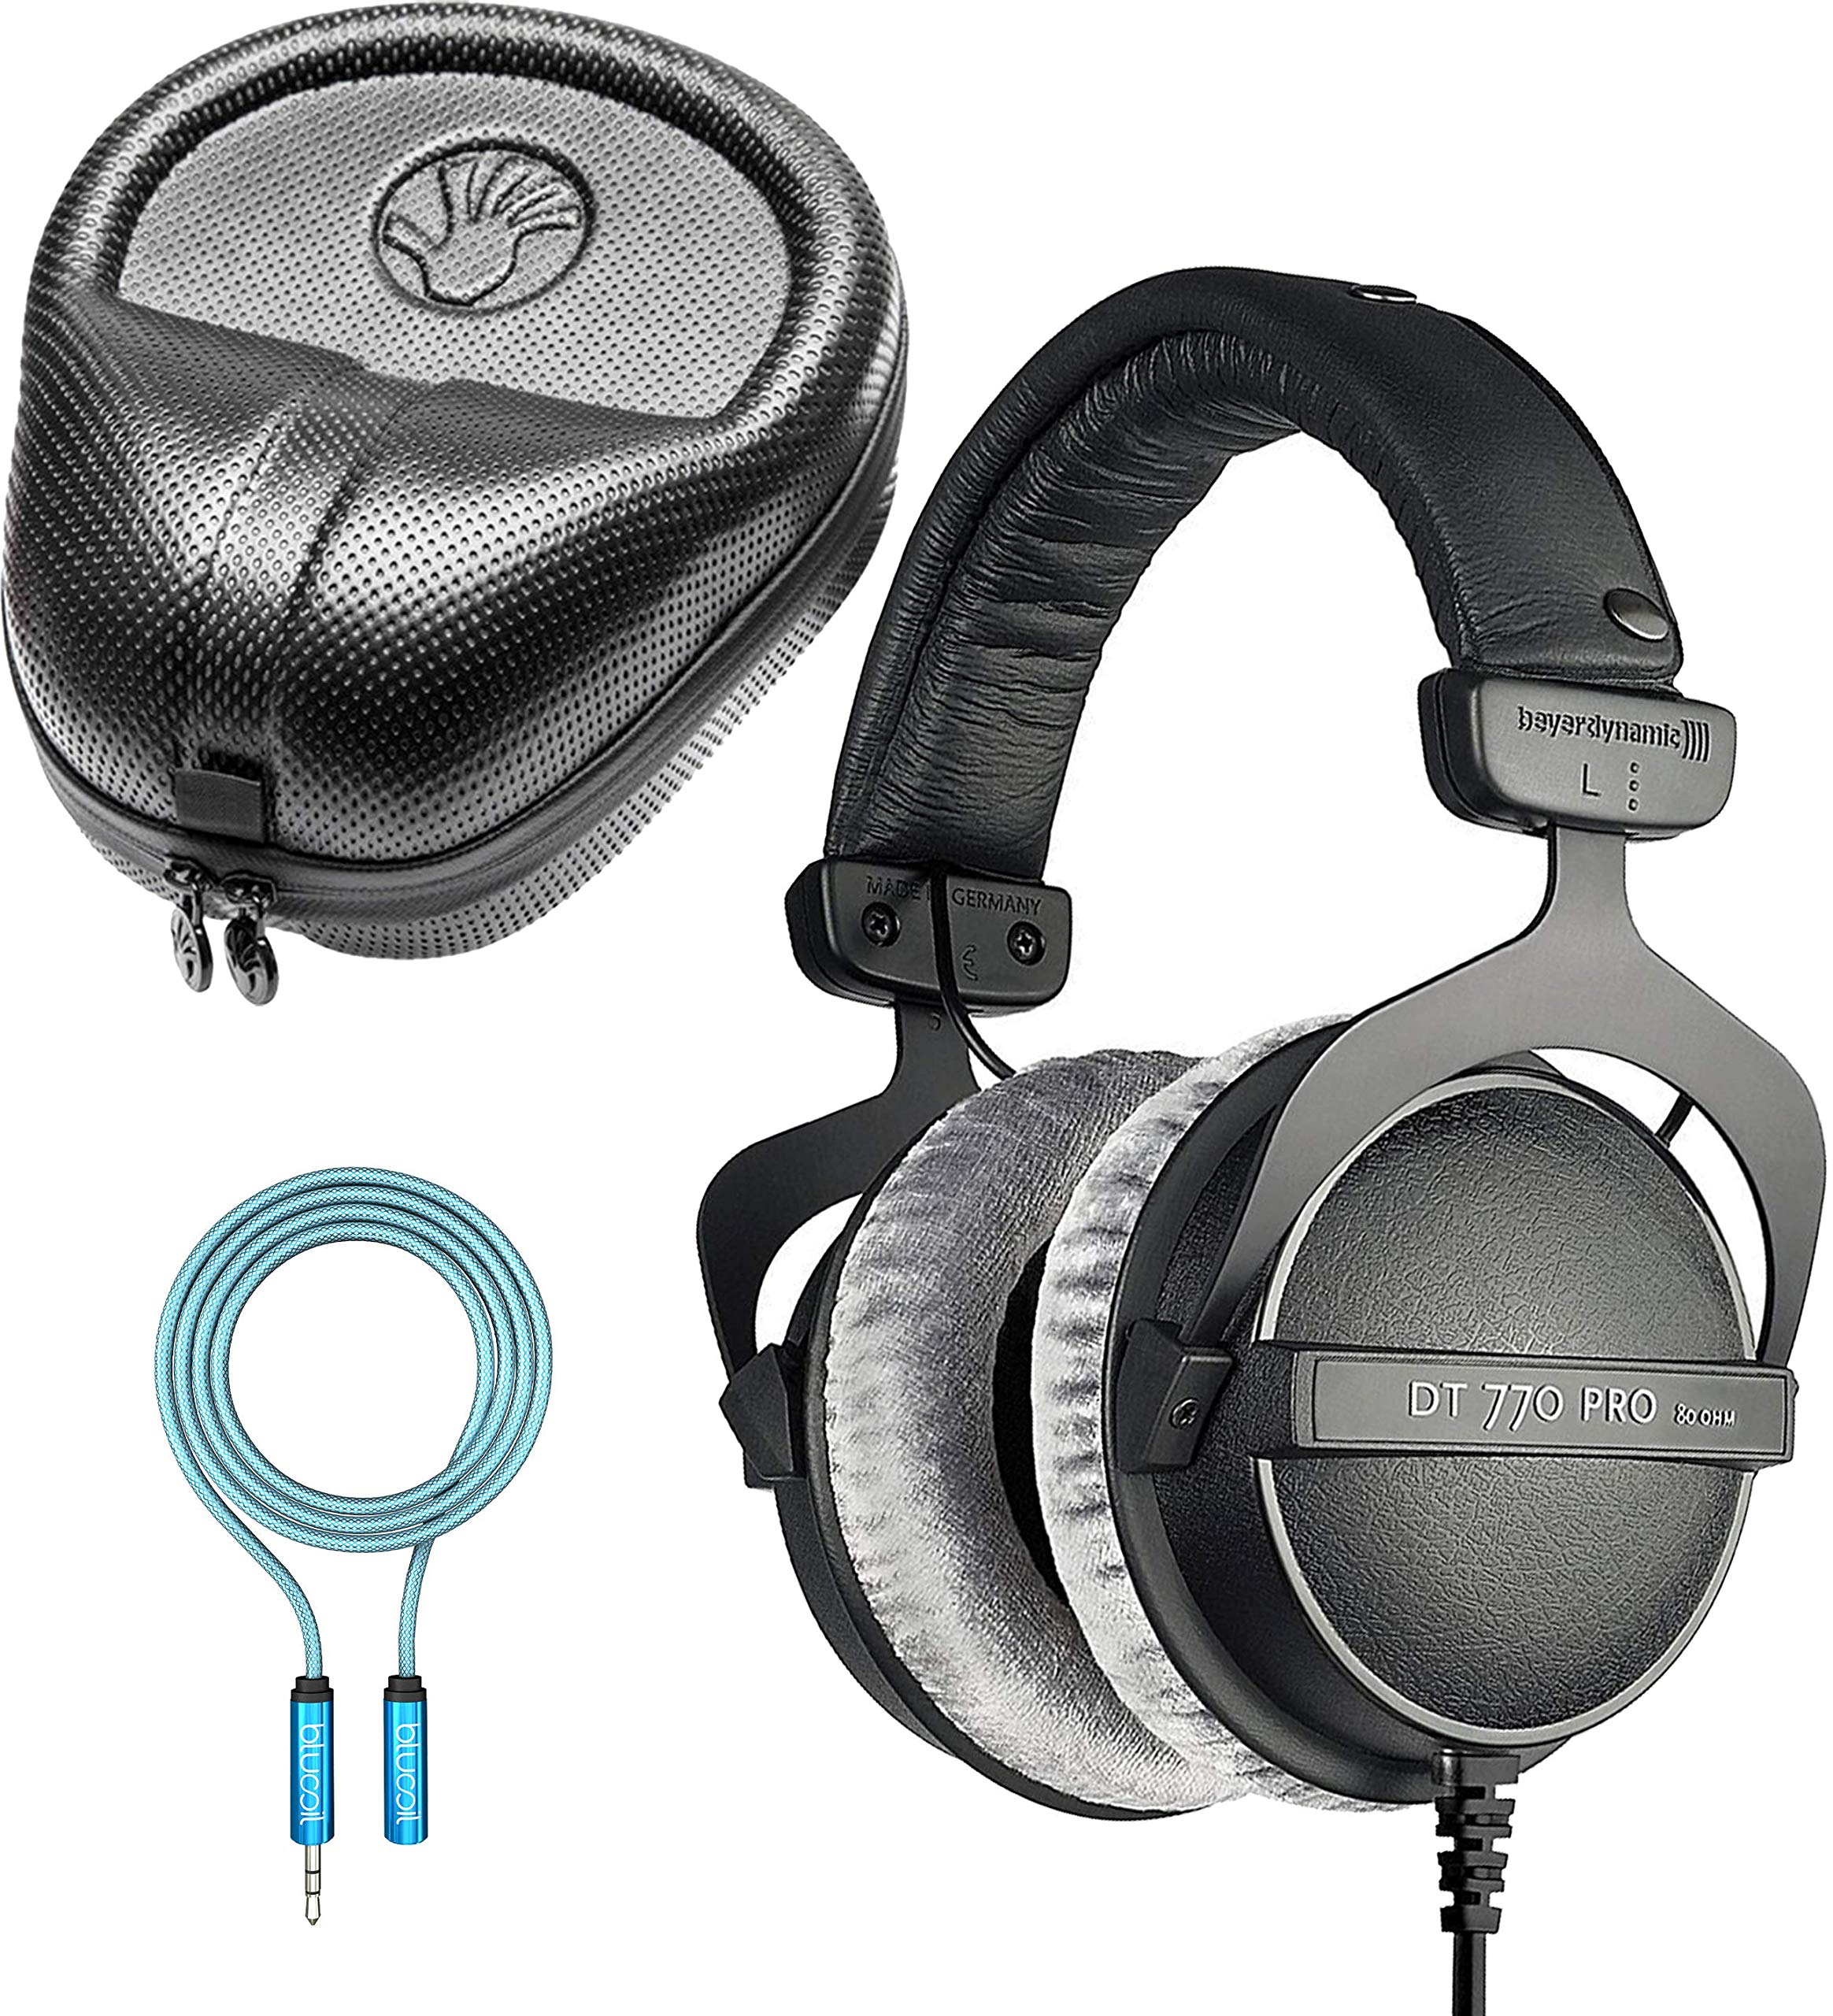 Blucoil Beyerdynamic DT 770 PRO 80 Ohm Over-Ear Studio Headphones in Gray for Smartphones & Computers Bundle with  6' 3.5mm Headphone Extension Cable, and Slappa Full-Sized HardBody PRO Headphone Case